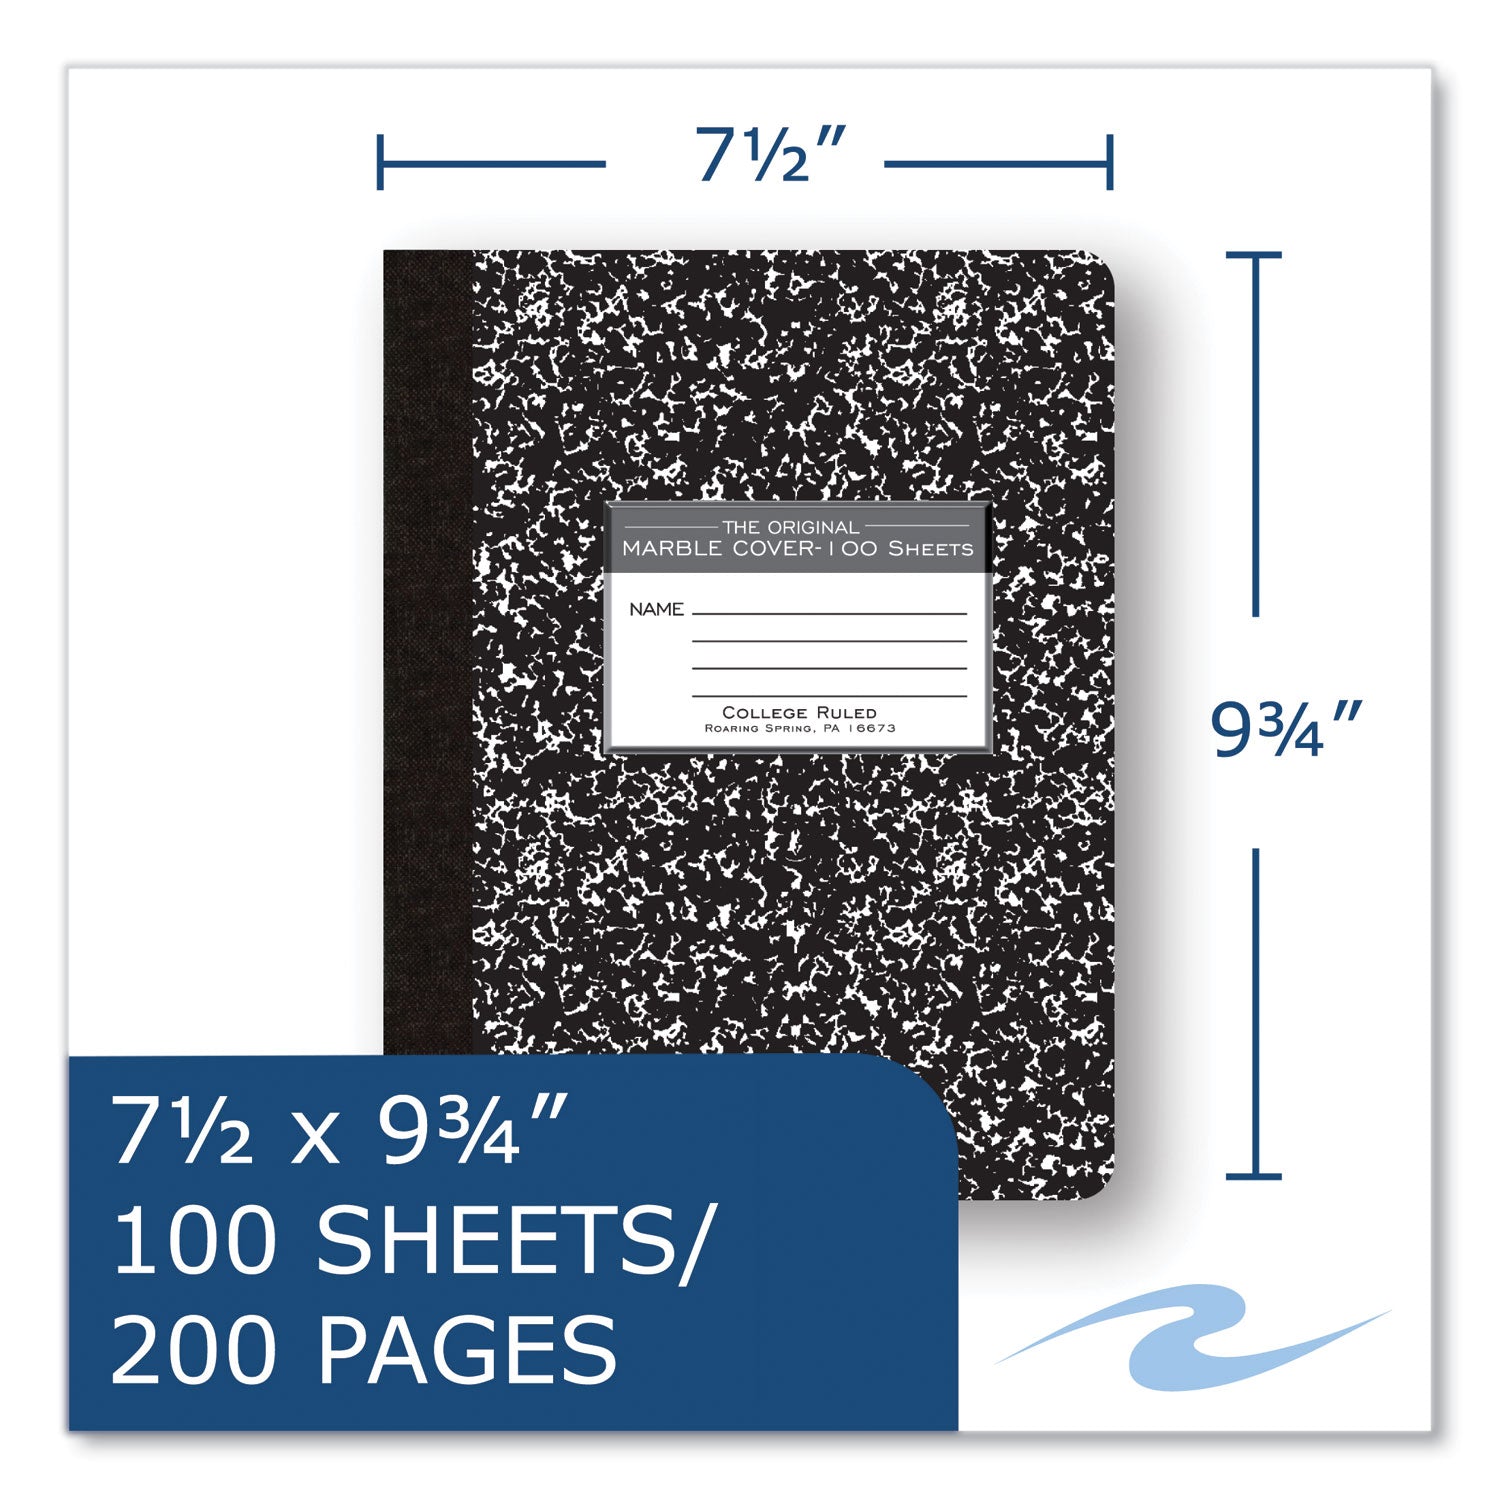 hardcover-marble-composition-book-med-college-rule-black-marble-cover-100-975-x-75-sheet-24-ct-ships-in-4-6-bus-days_roa77264cs - 6